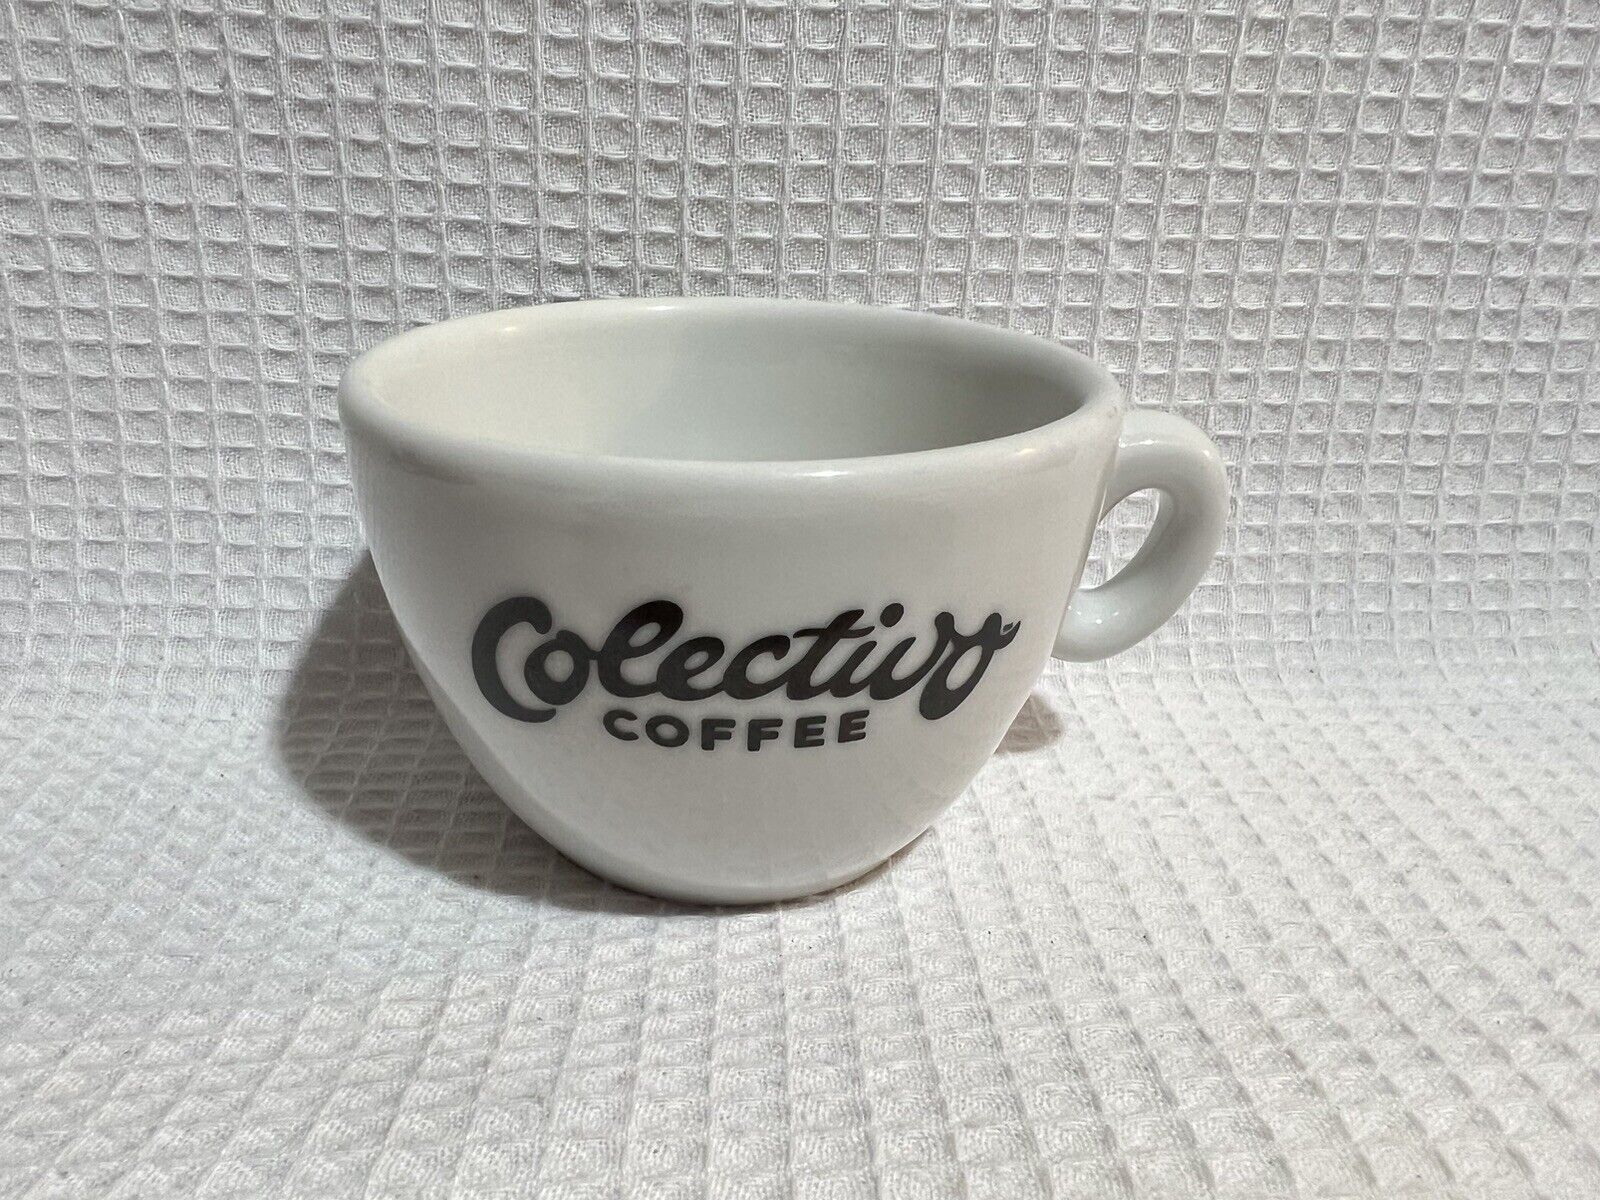 Inker Porcelain-White/Black “COLECTIVO COFFEE” Logo Advertising Coffee Cup